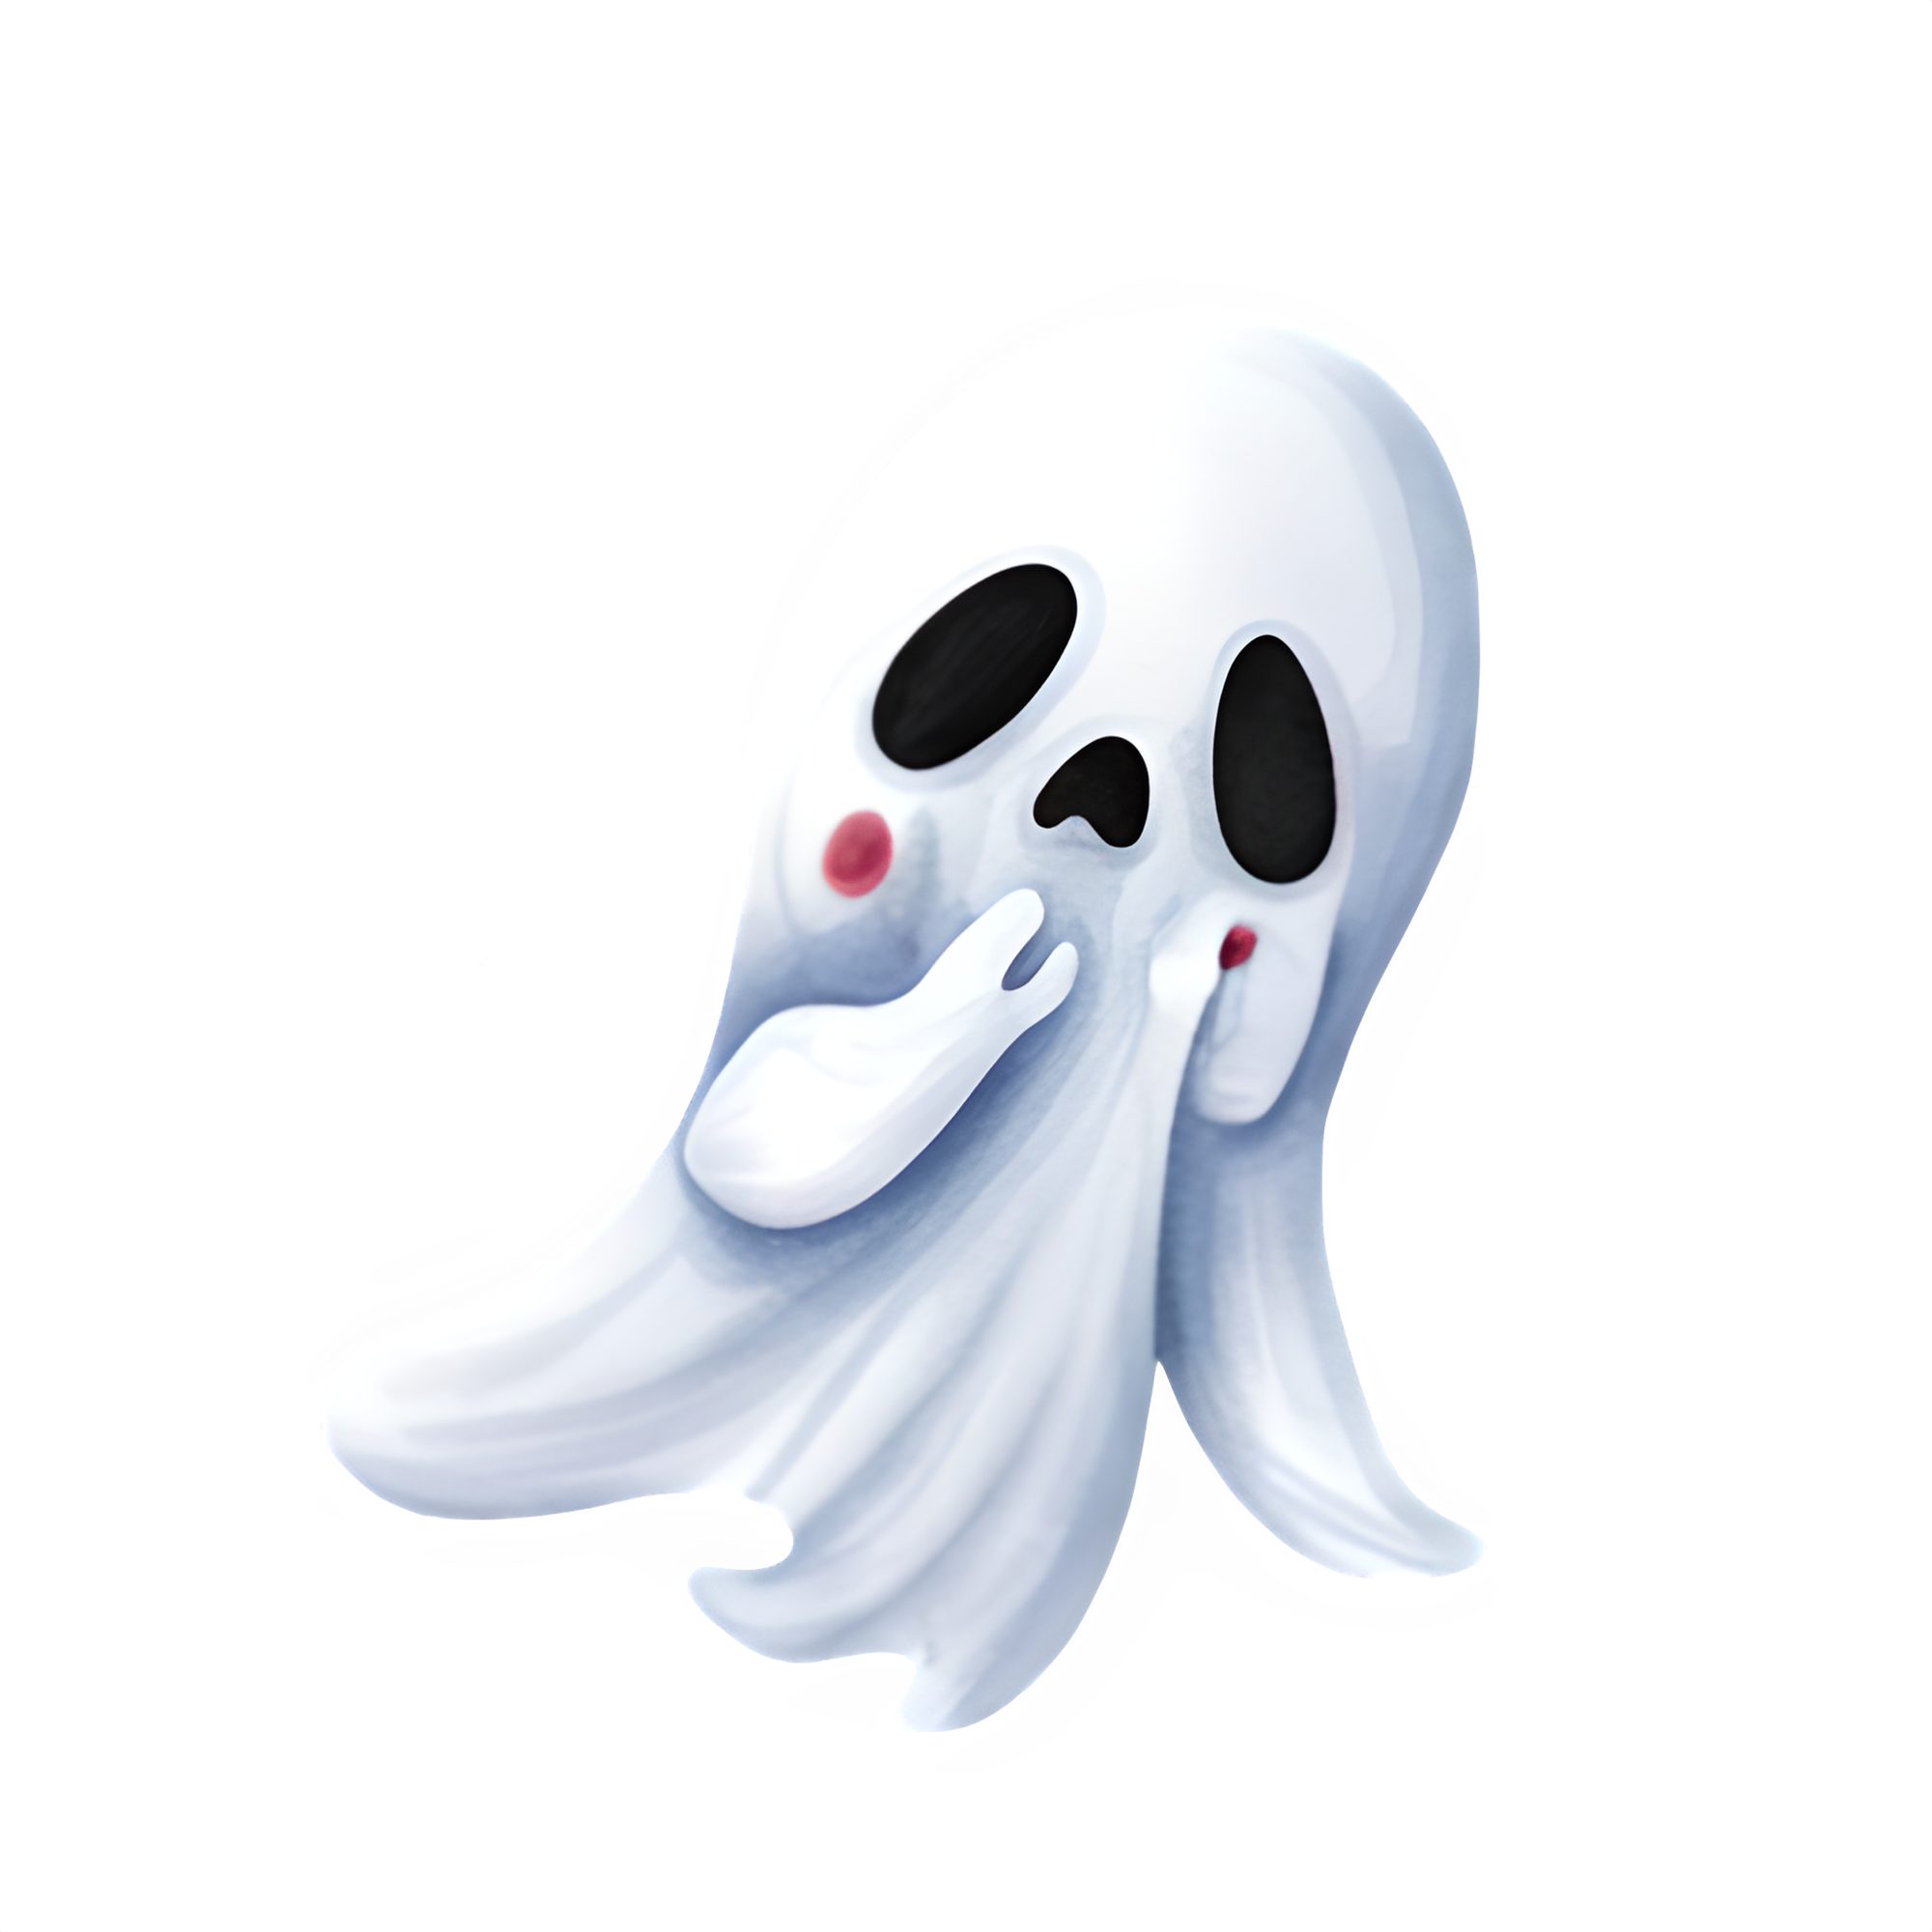 Ghost Clip Art @ Copyright Designs by Forte